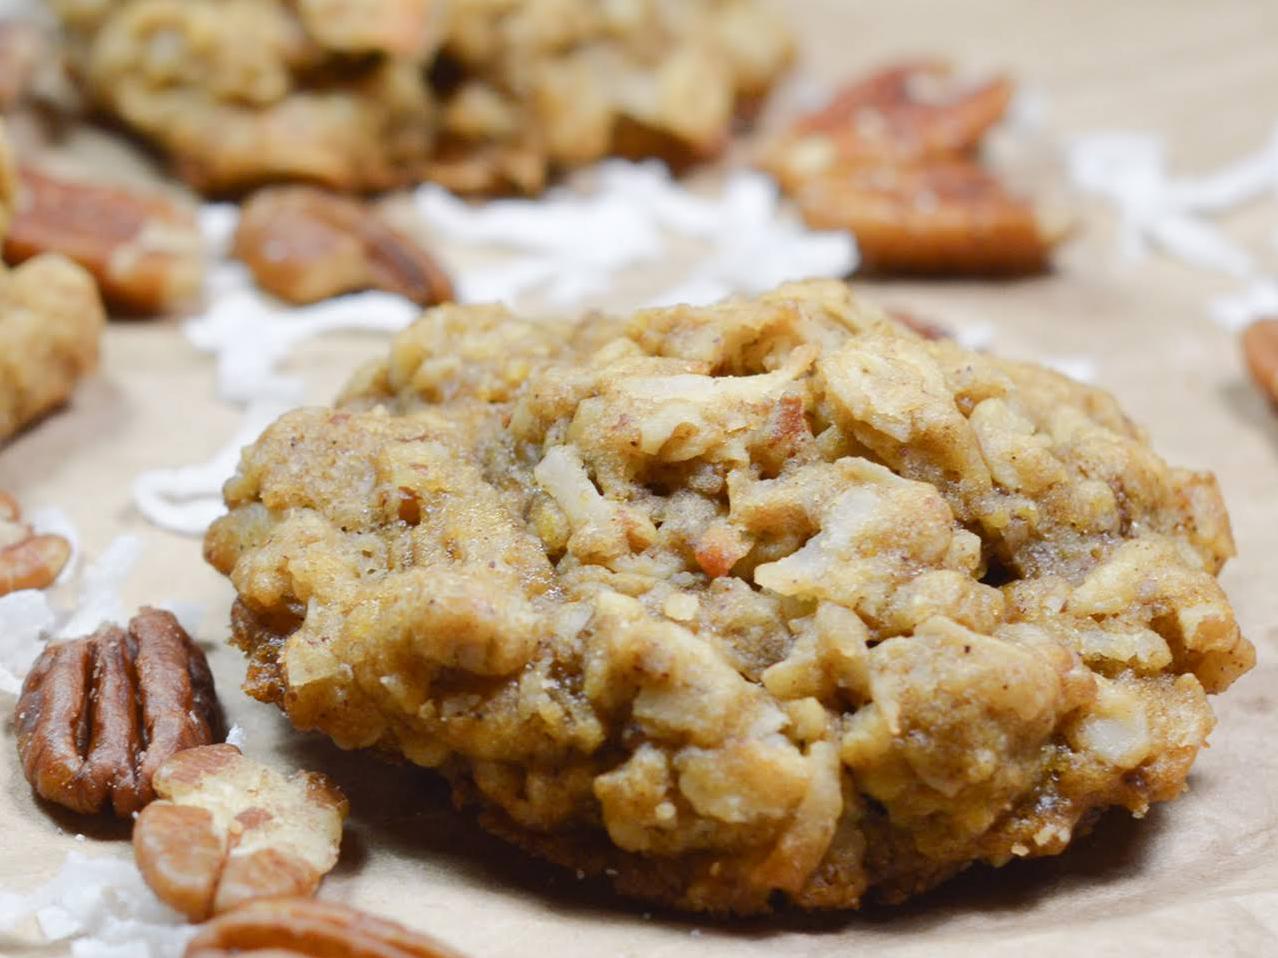  Sink your teeth into these chewy and delicious gluten-free oatmeal cookies!